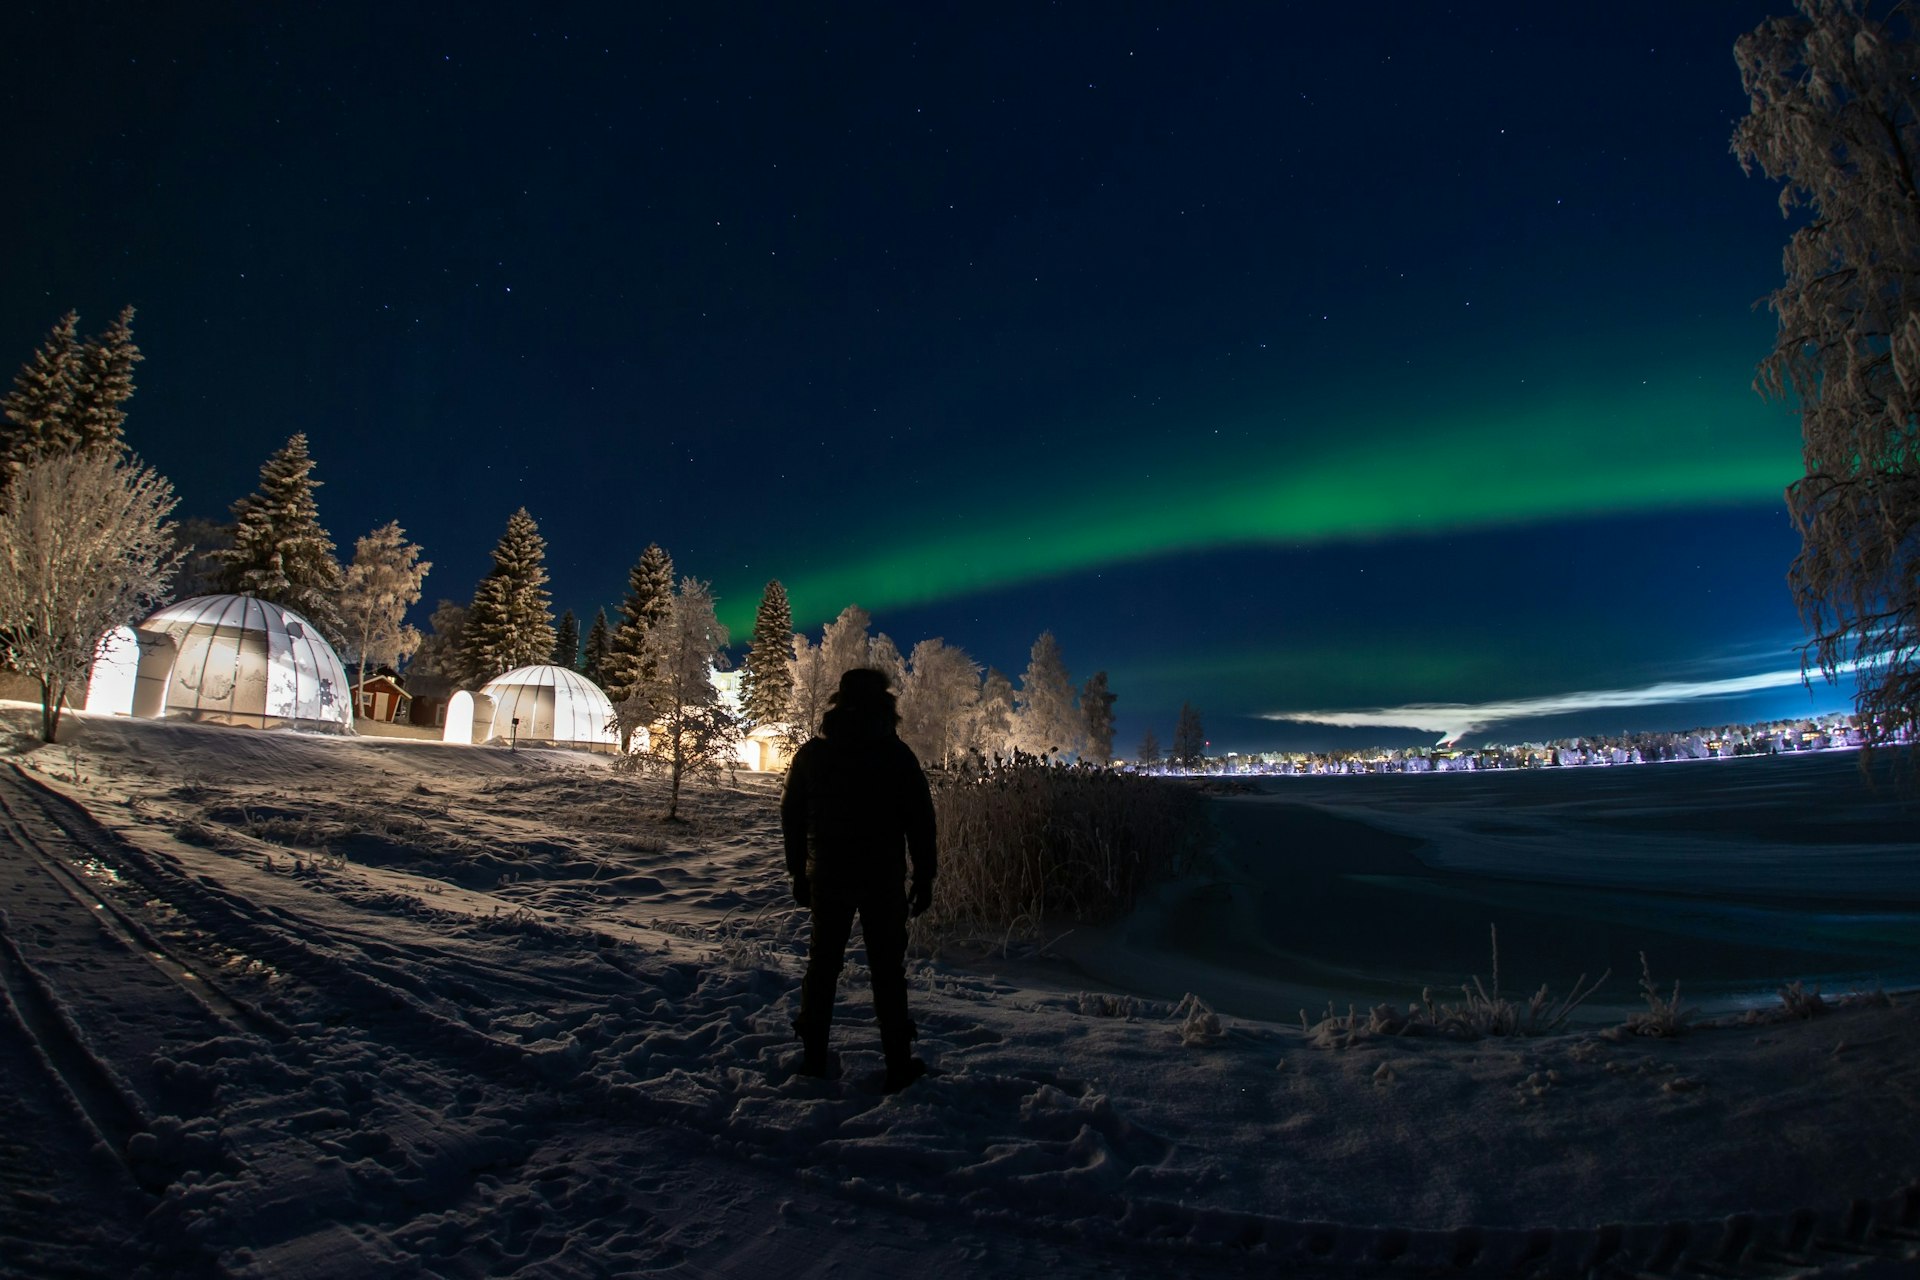 A man walking in front of igloo bubble cabins with the Northern Lights behind him